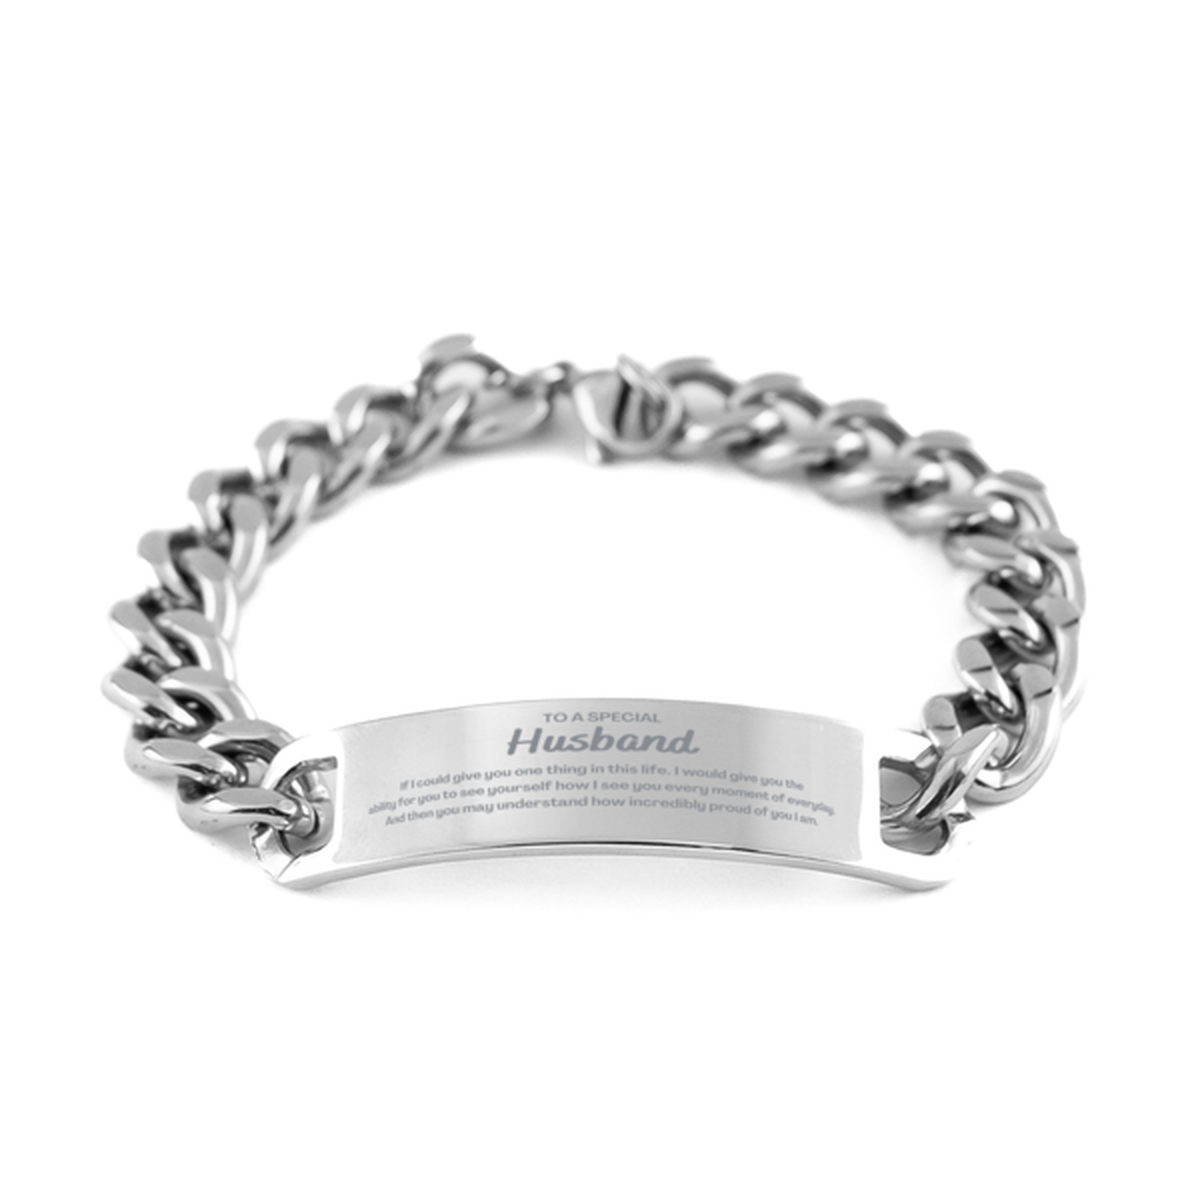 To My Husband Cuban Chain Stainless Steel Bracelet, Gifts For Husband Engraved, Inspirational Gifts for Christmas Birthday, Epic Gifts for Husband To A Special Husband how incredibly proud of you I am